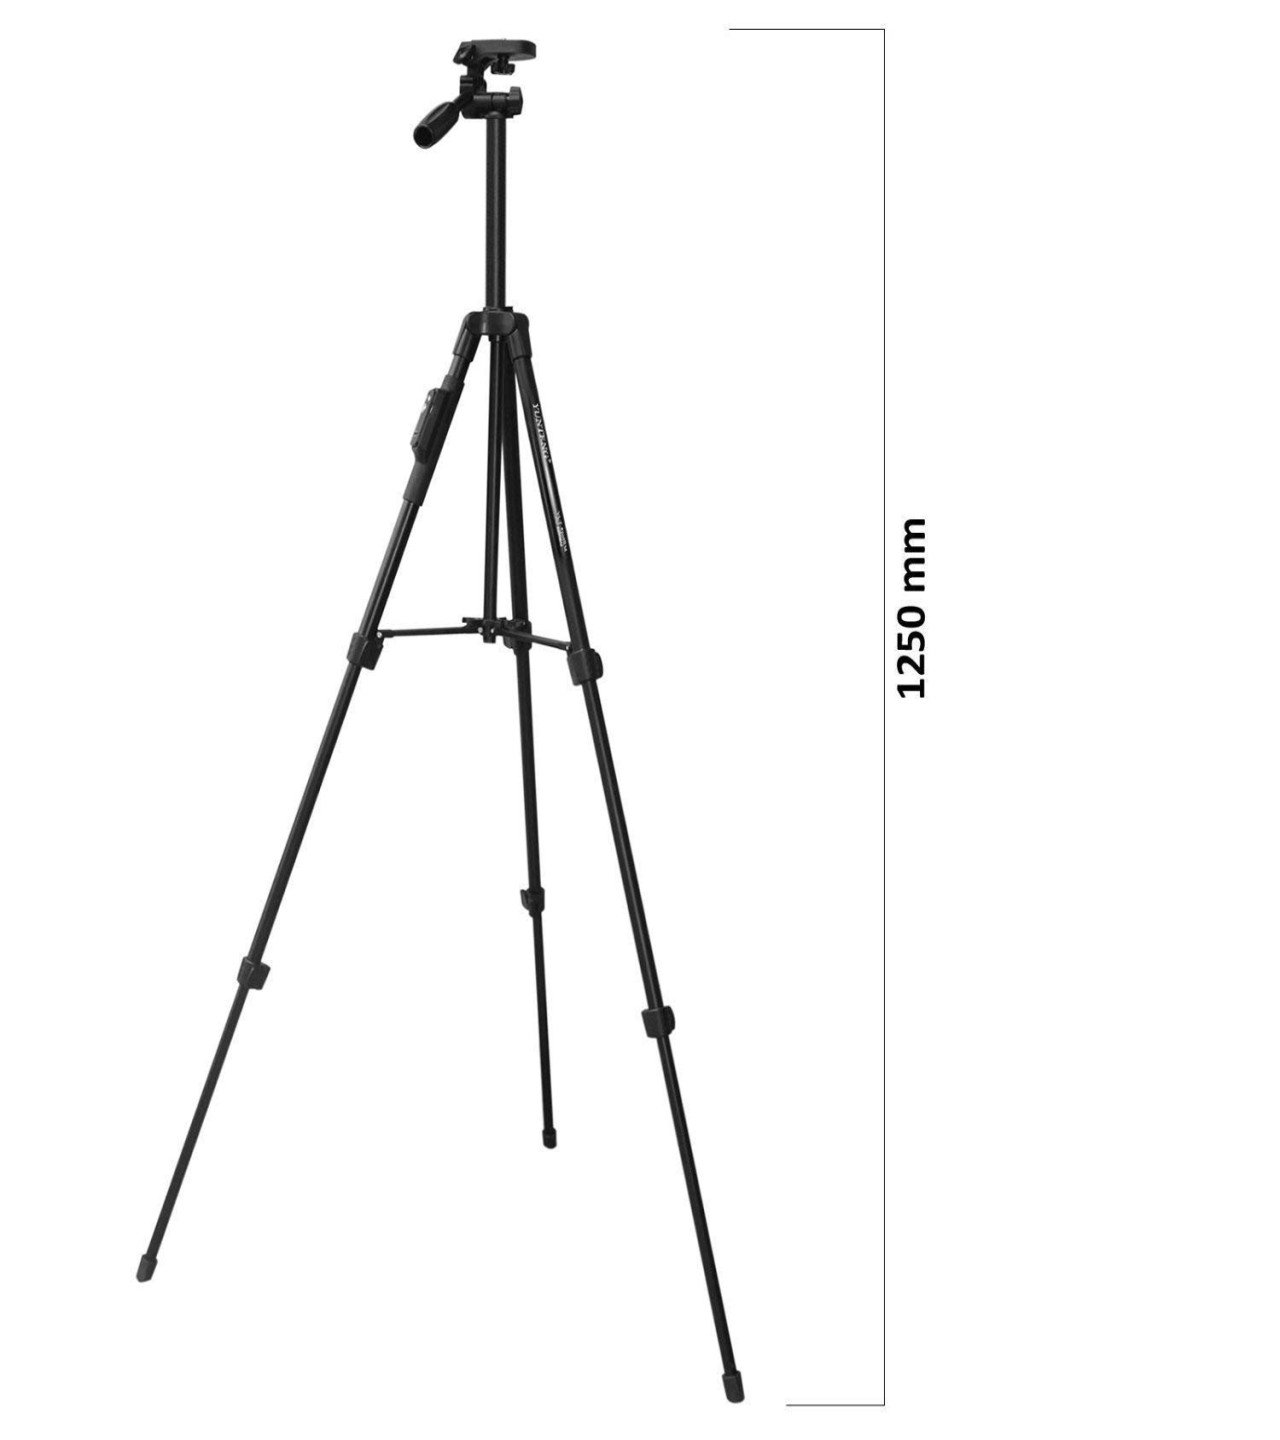 Selfie Video YUNTENG VCT 5208 RM Aluminum Tripod with 3-Way Head & Bluetooth Remote